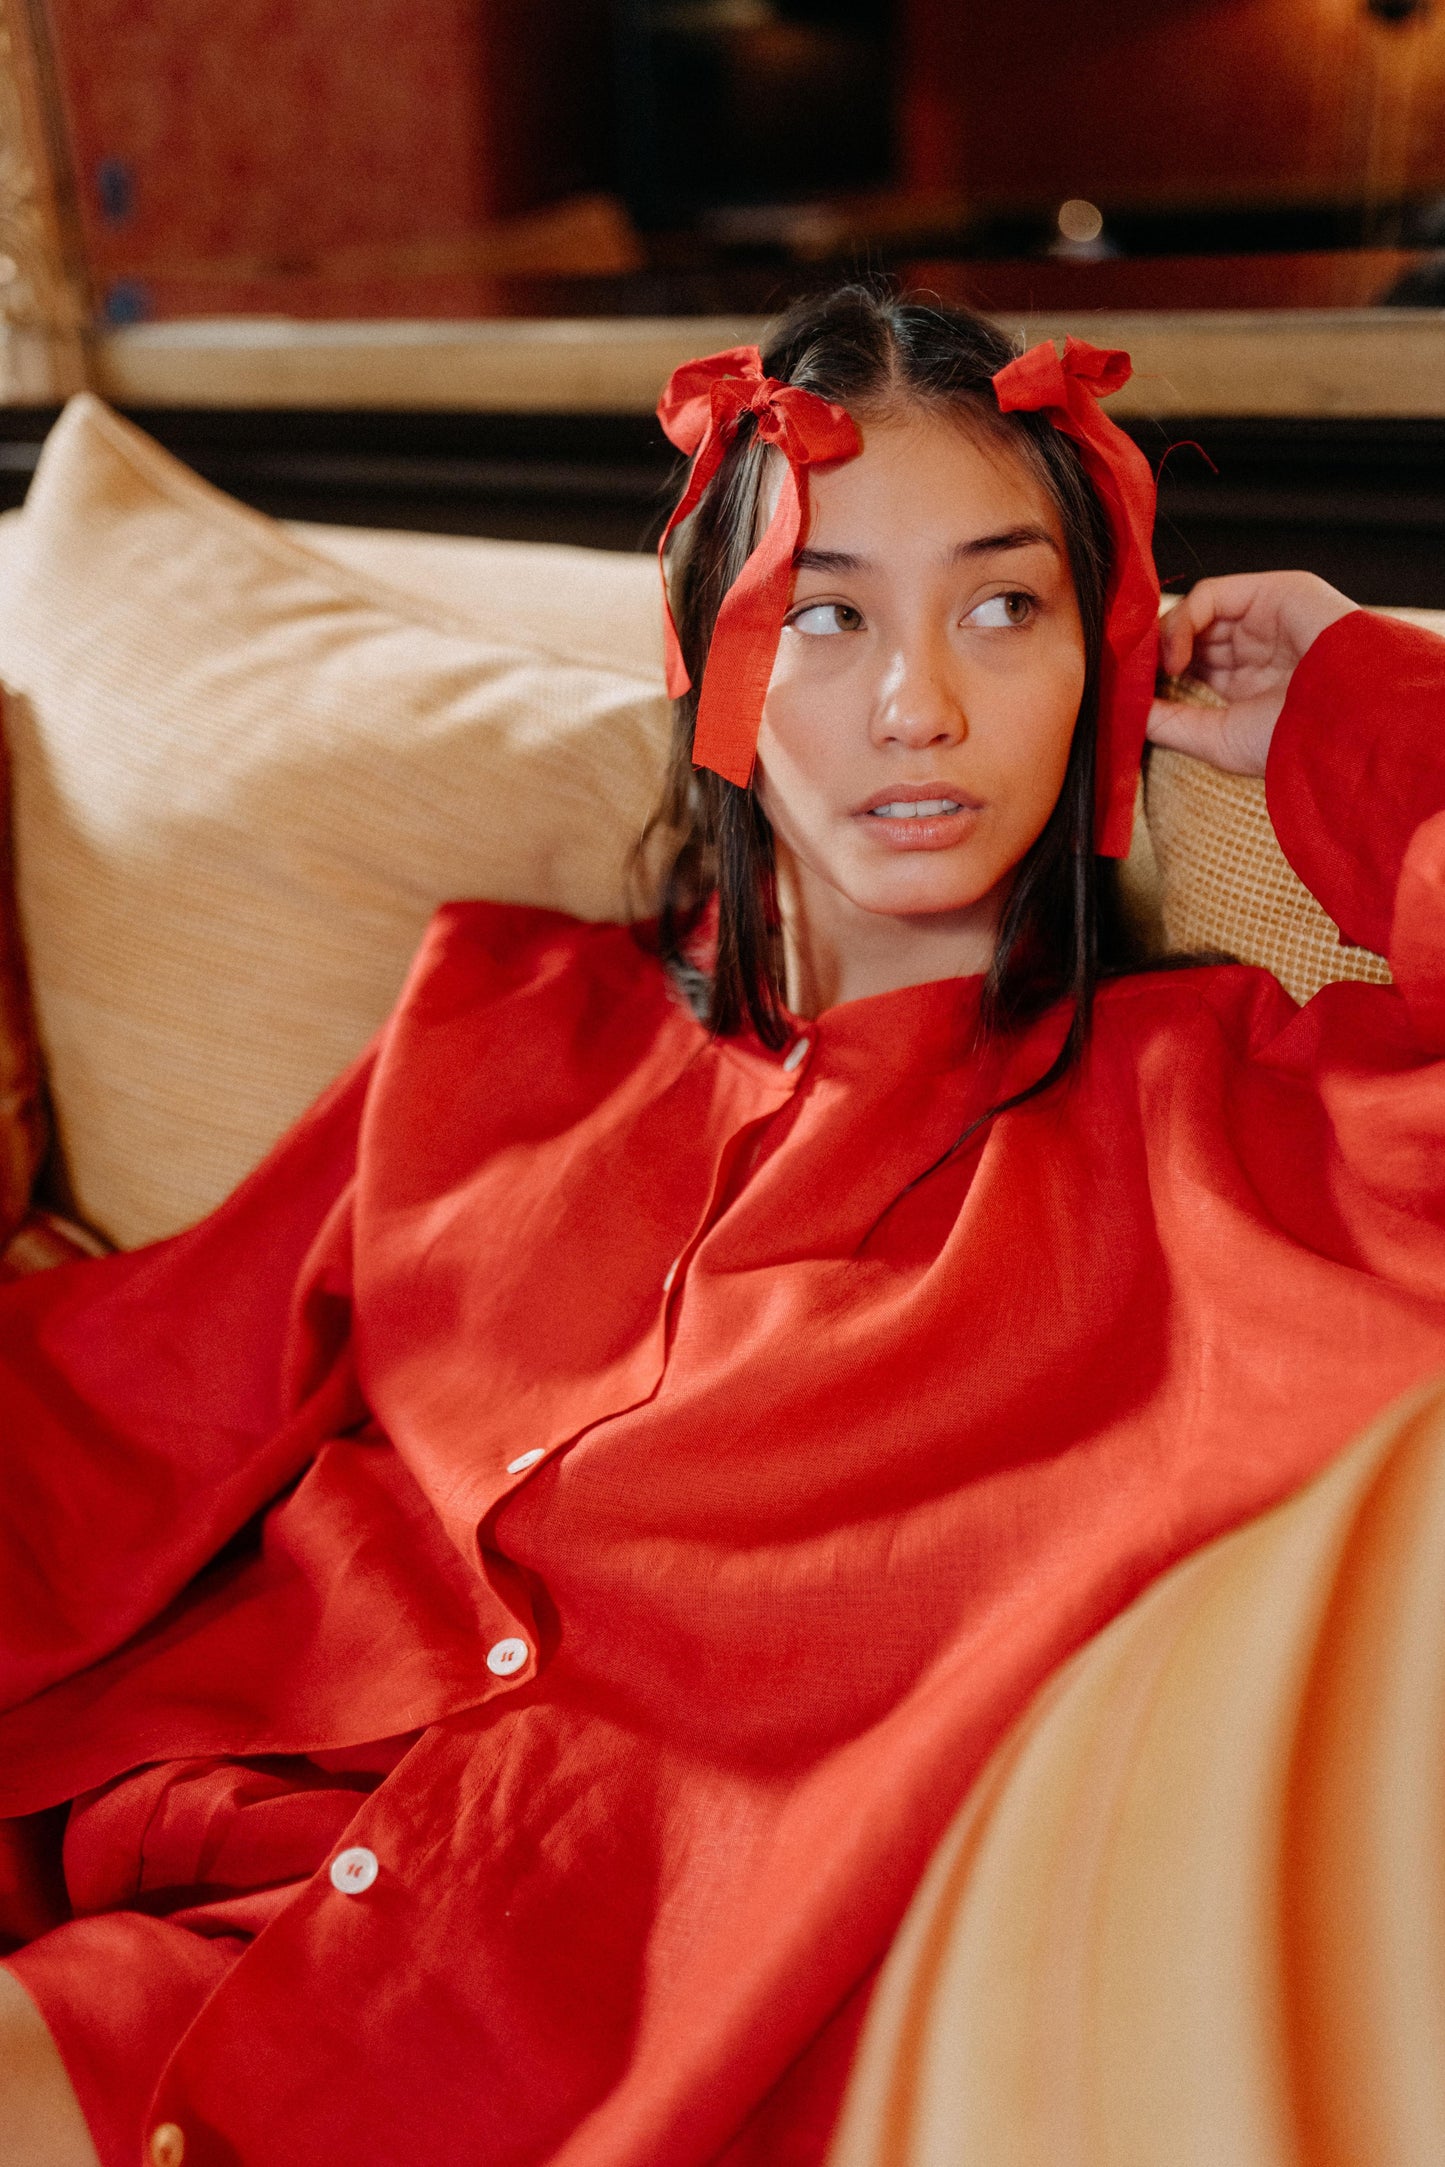 BOW LOUNGE SET | *Ready to Ship for Valentines ❤️ A new special edition lounge set in our poppy red linen. The oversized shirt features a fold over detail beneath the arm which ties into a fun bow detail on either side. Wear with matching shorts, or by it